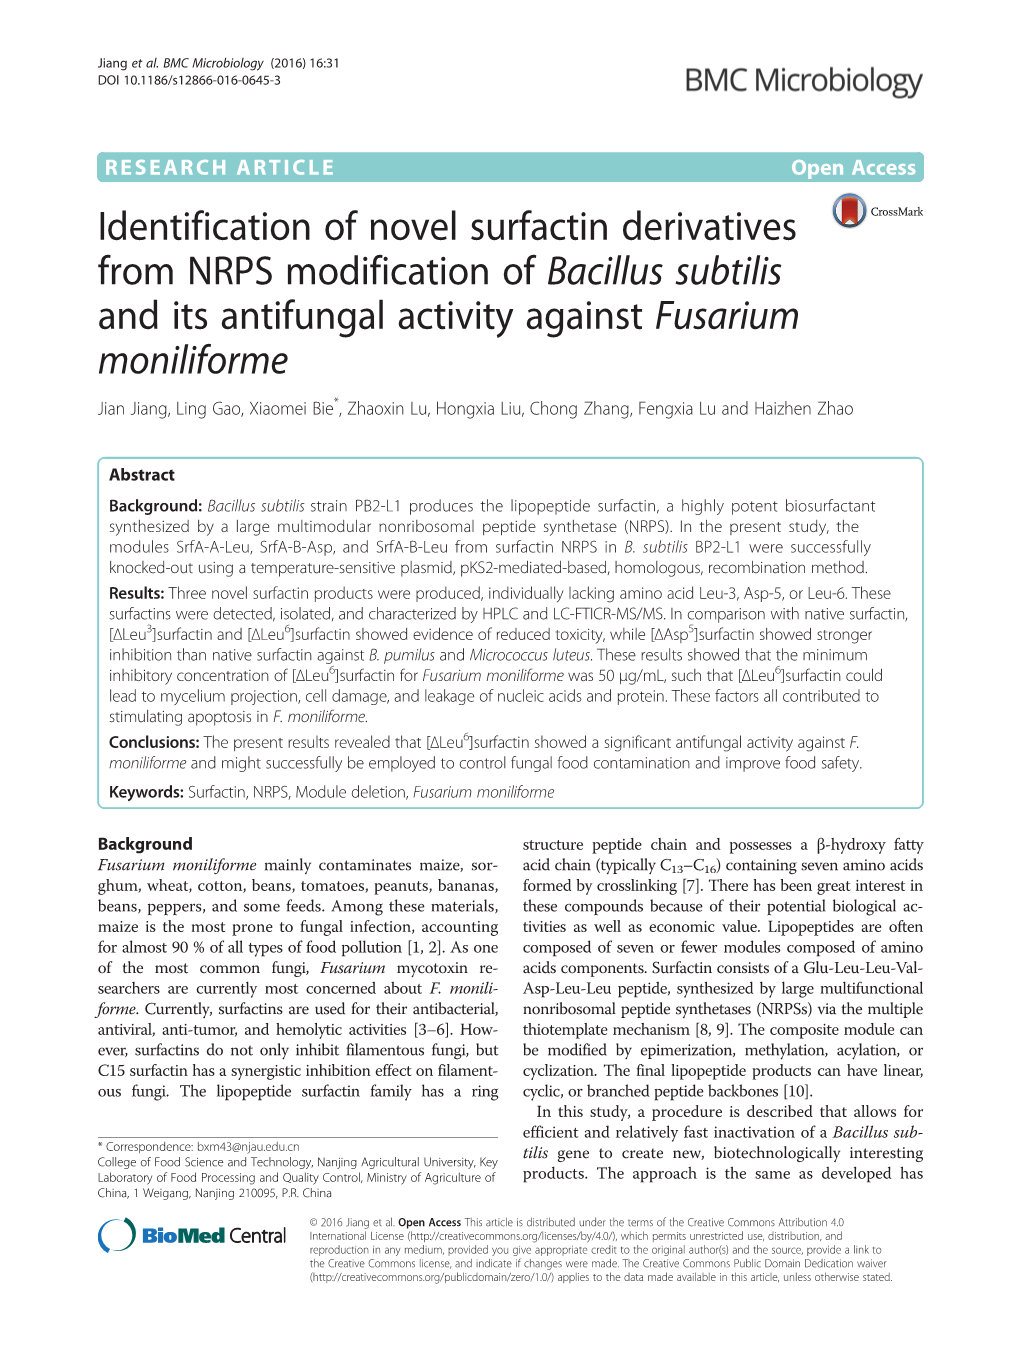 Identification of Novel Surfactin Derivatives from NRPS Modification